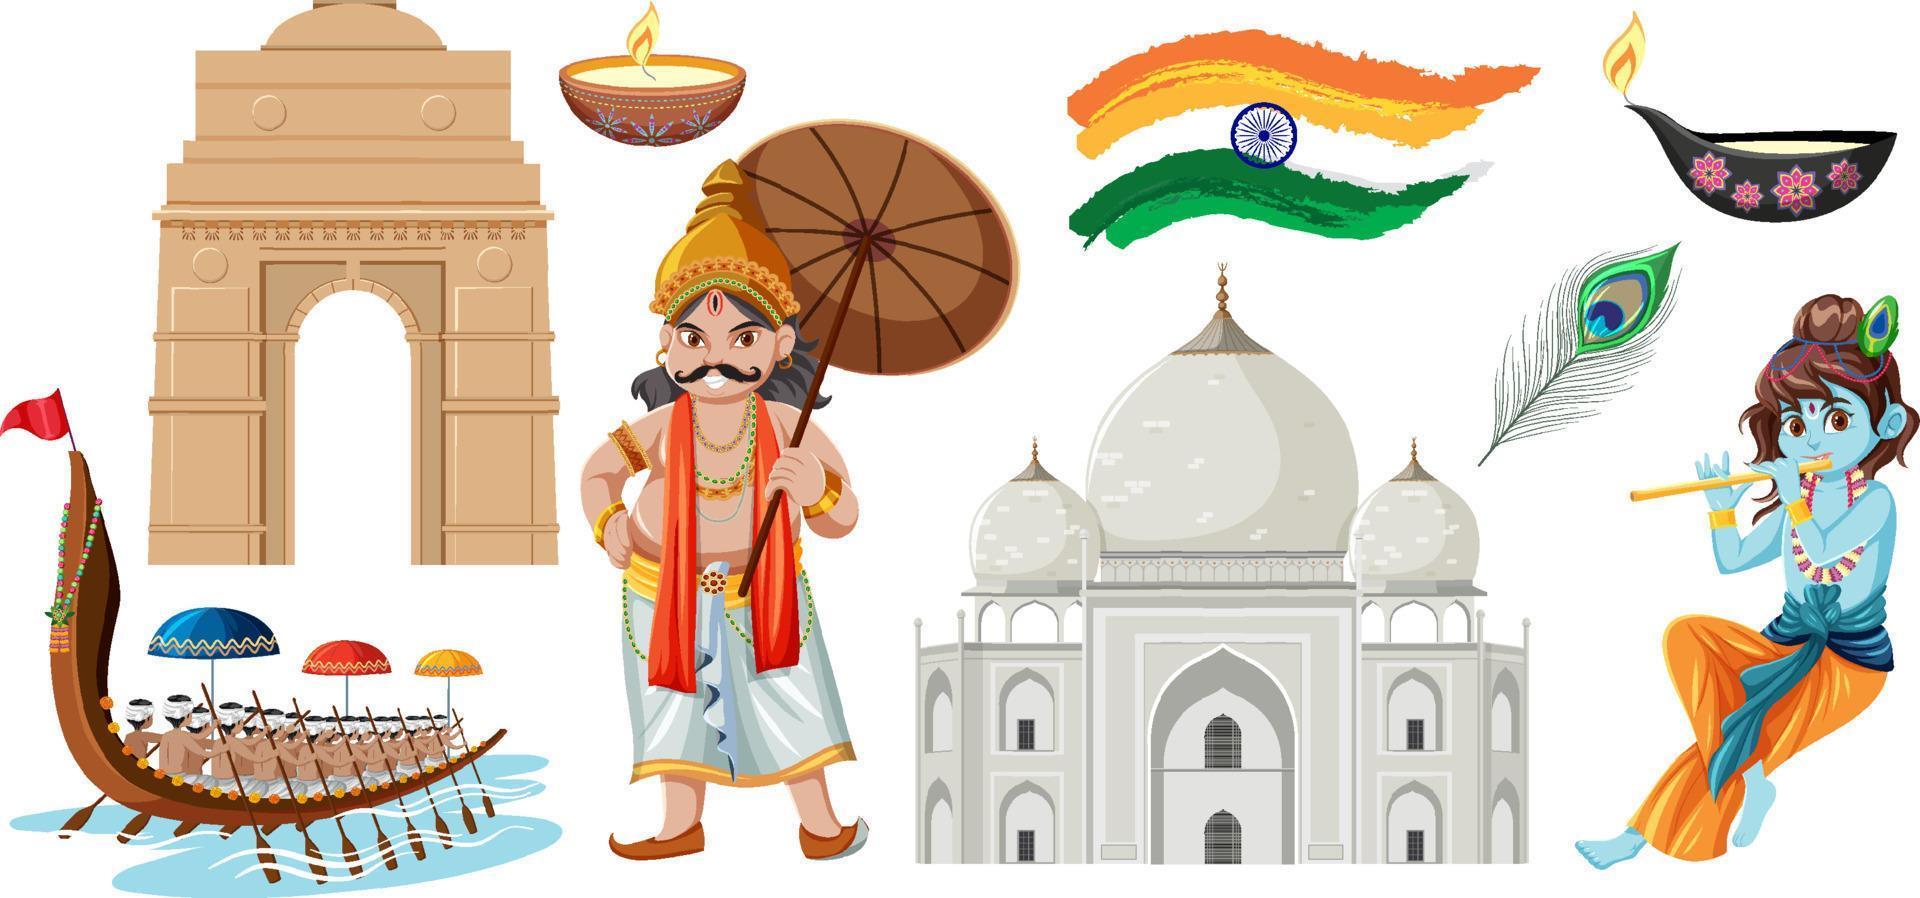 Set of Indian culture objects and symbols vector